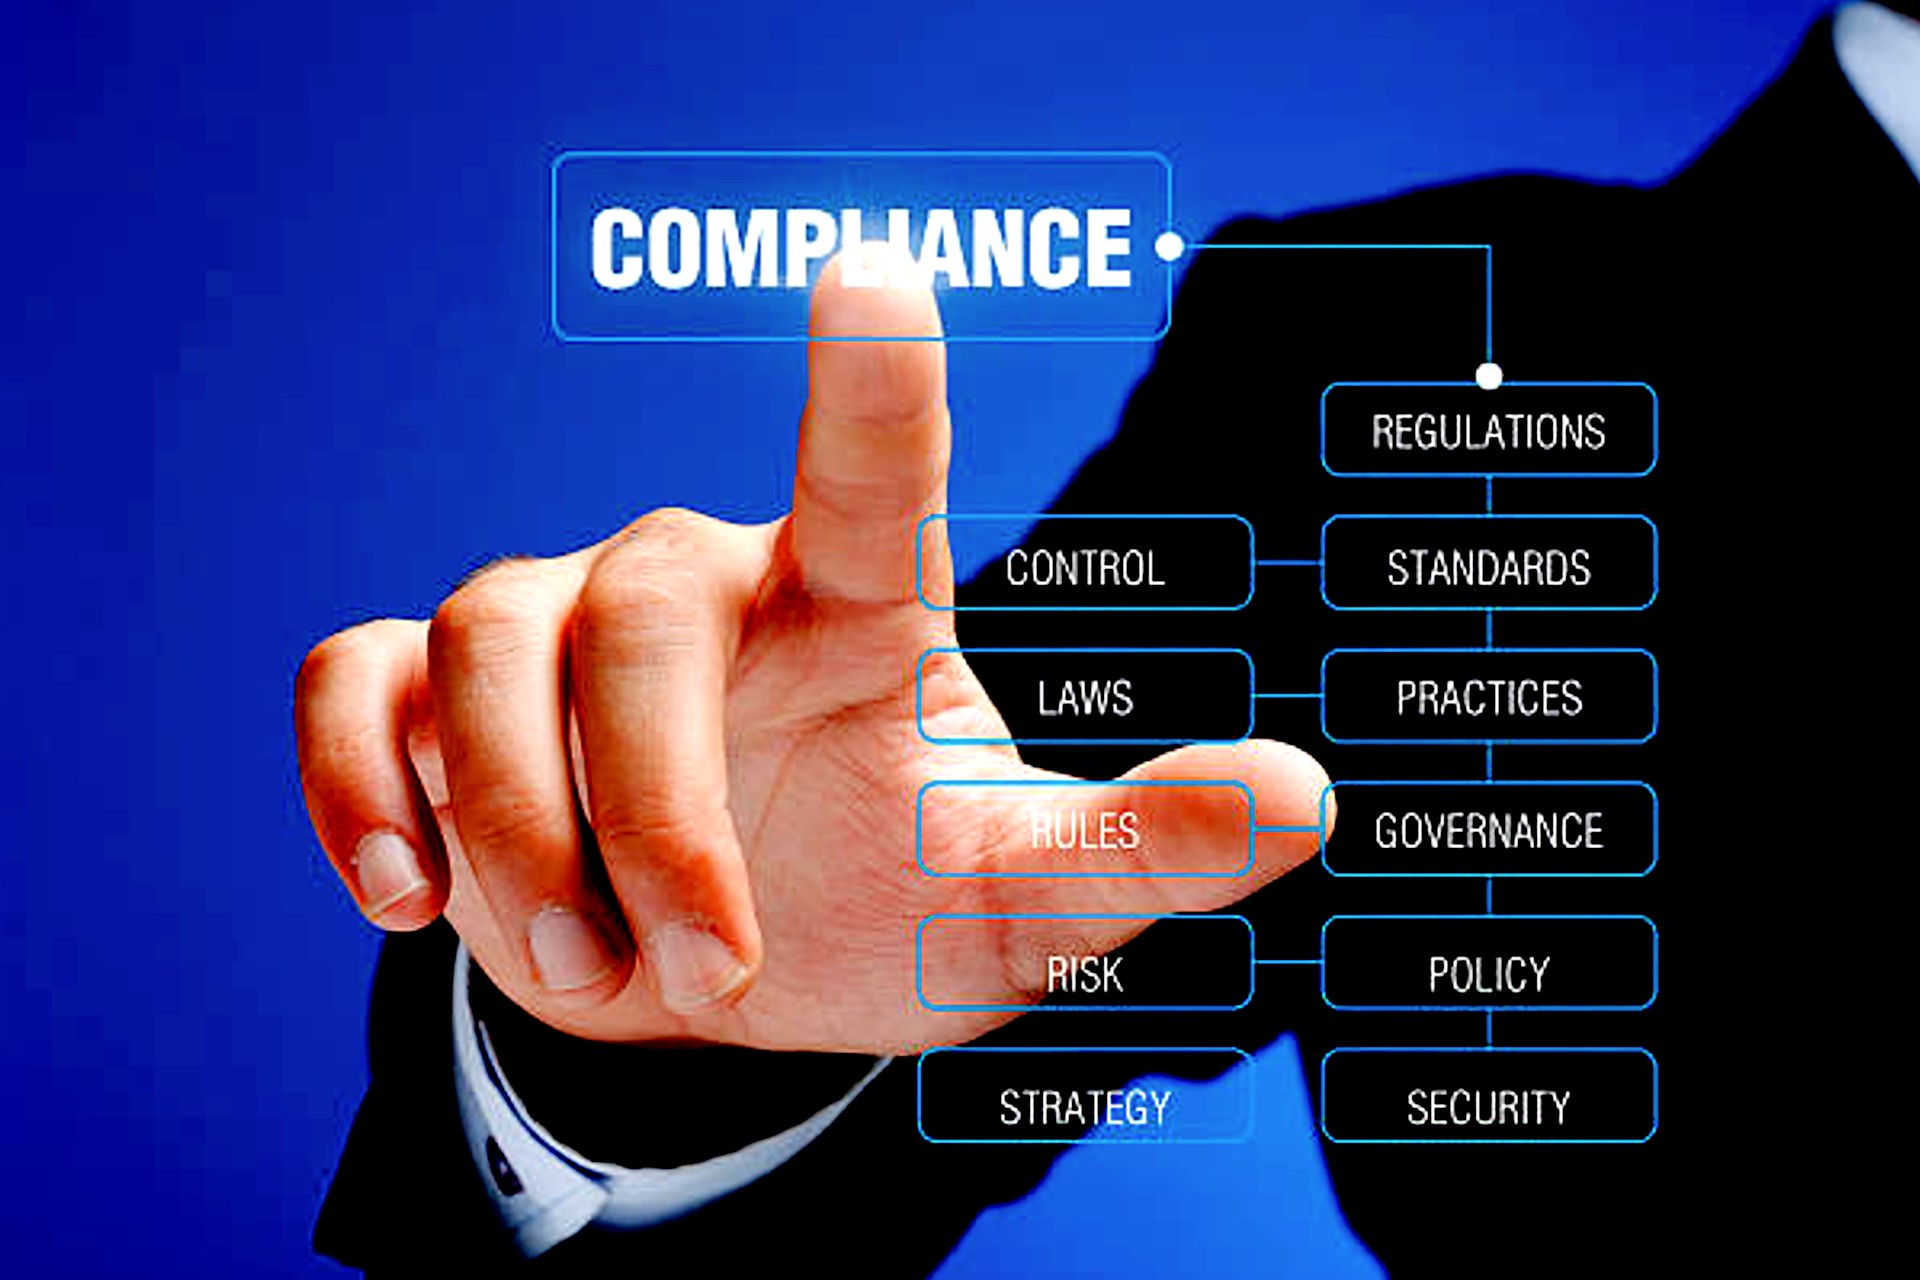 CYBRANTS governance risk management and compliance